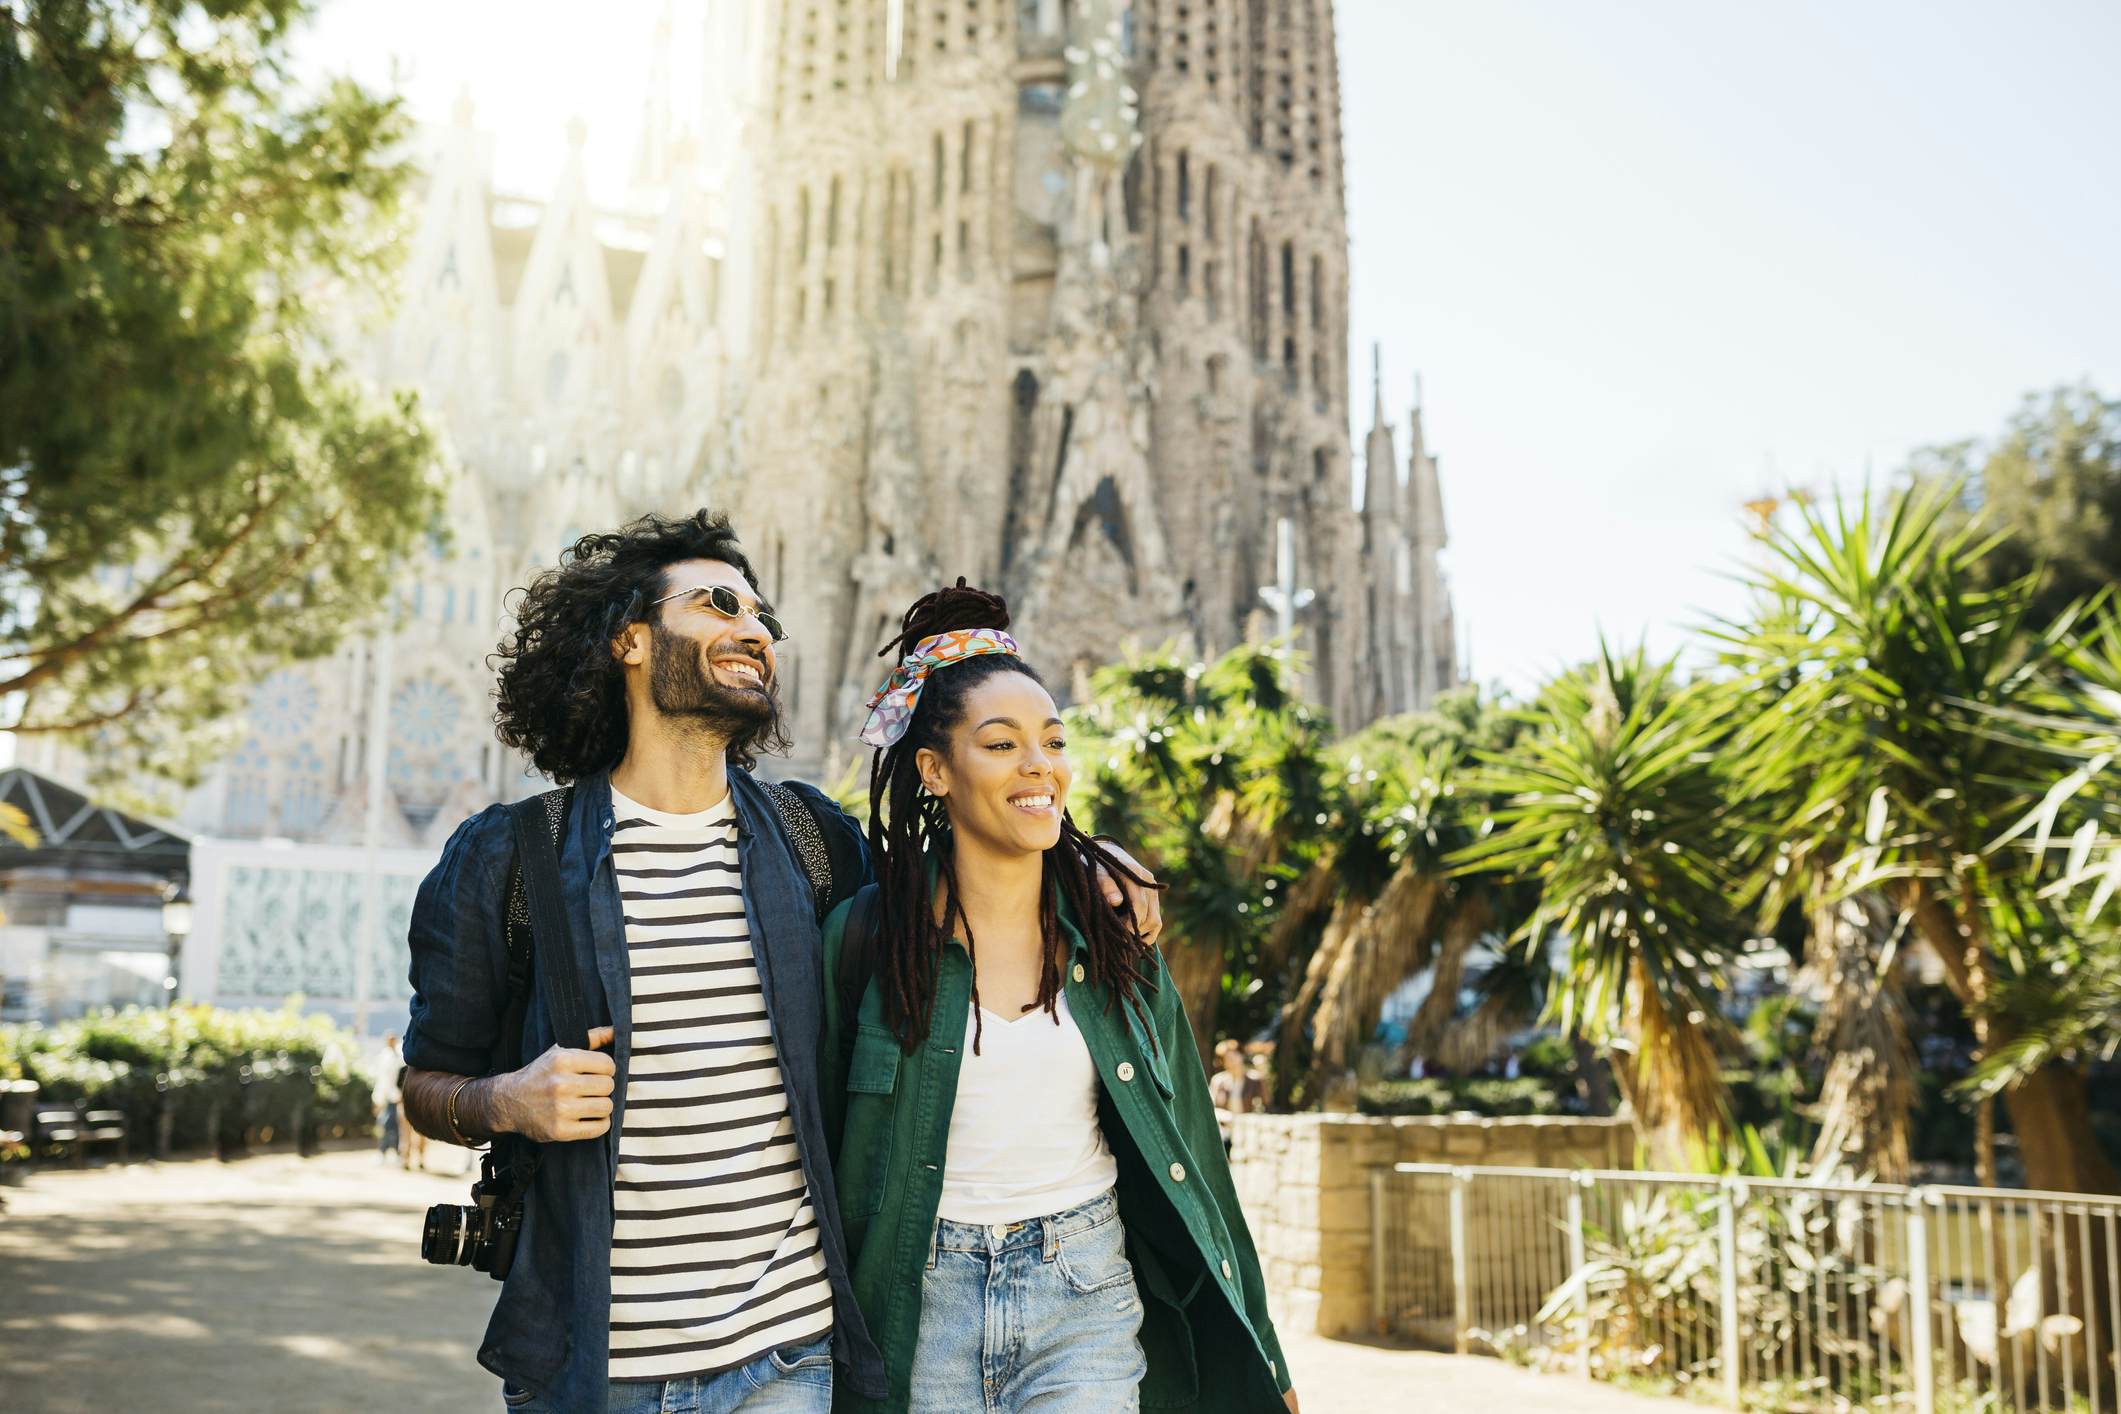 10 Best Places To Go Shopping in Barcelona, Spain